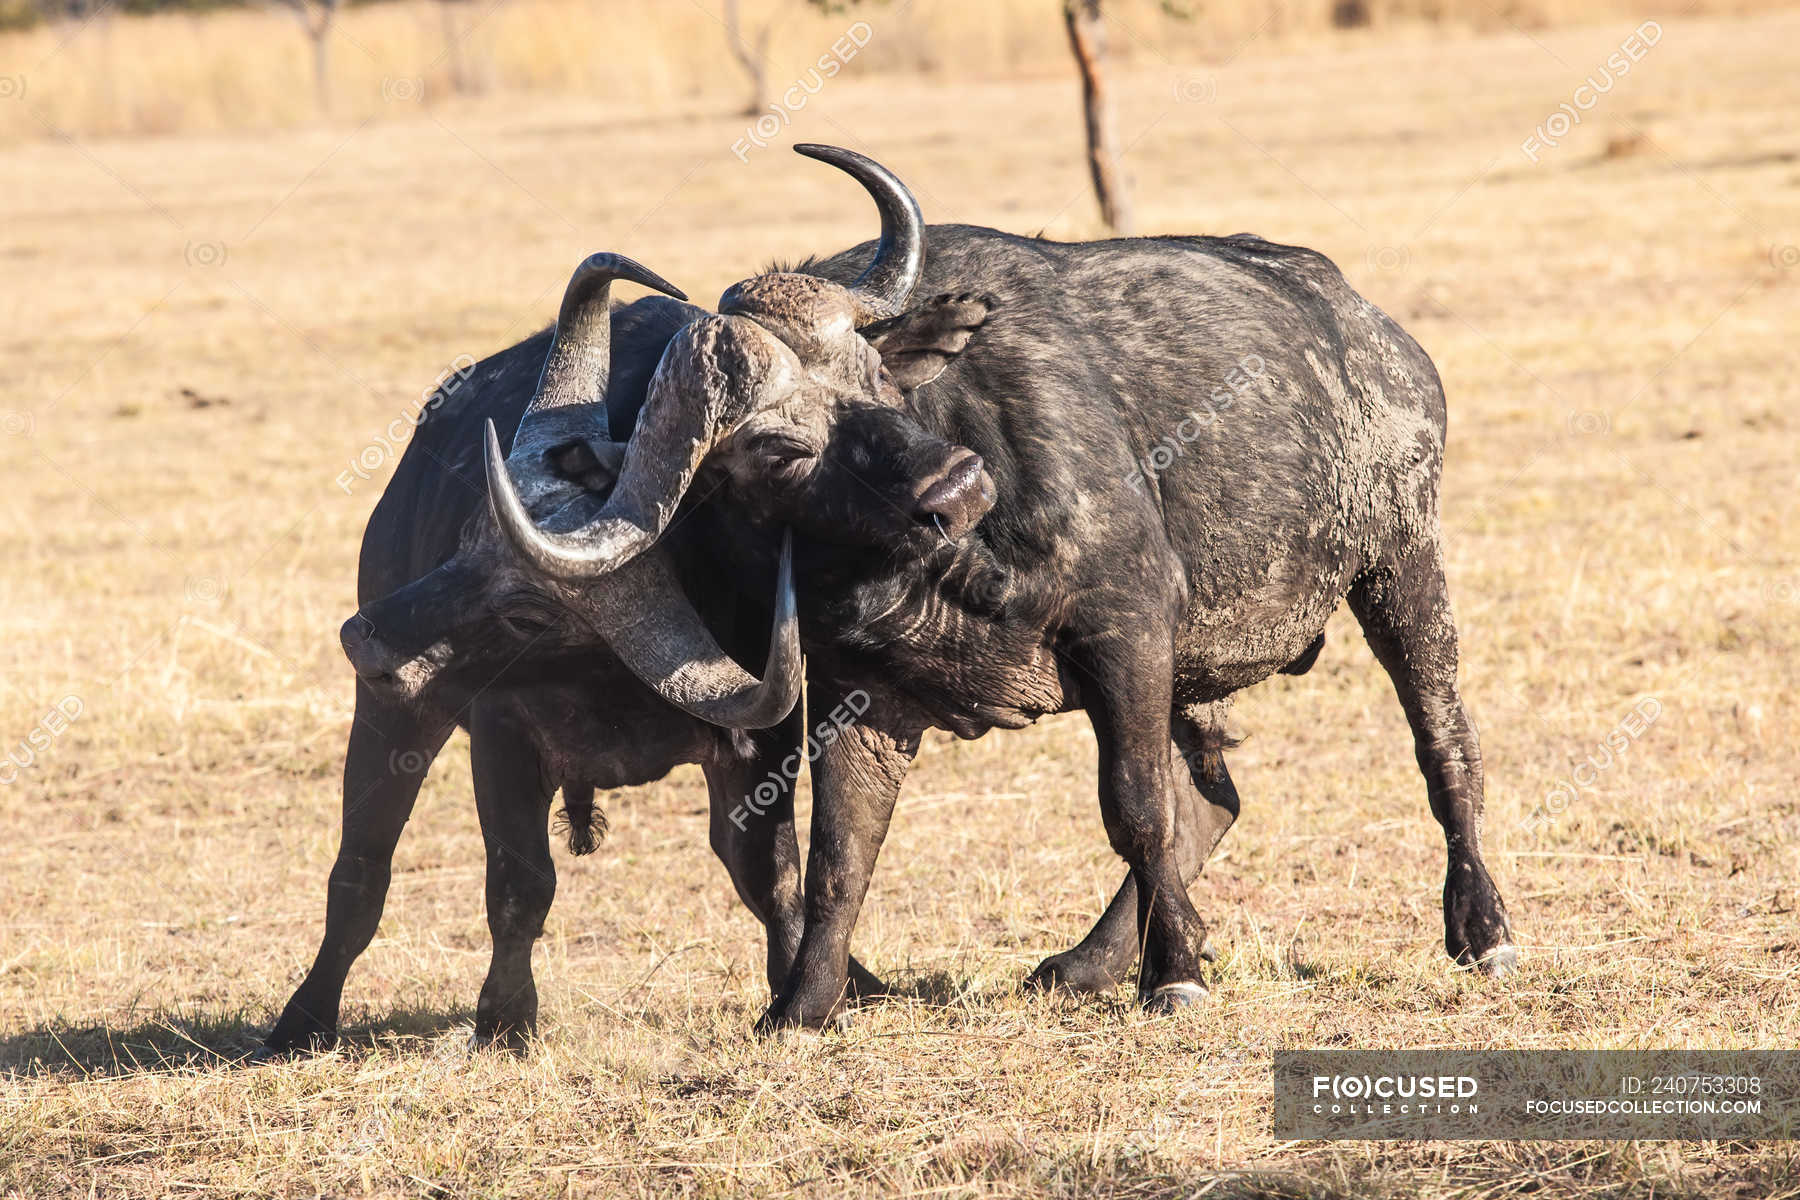 Stole på bekendtskab At tilpasse sig Scenic view of two Buffalo fighting, Limpopo, South Africa — competition,  safari animal - Stock Photo | #240753308